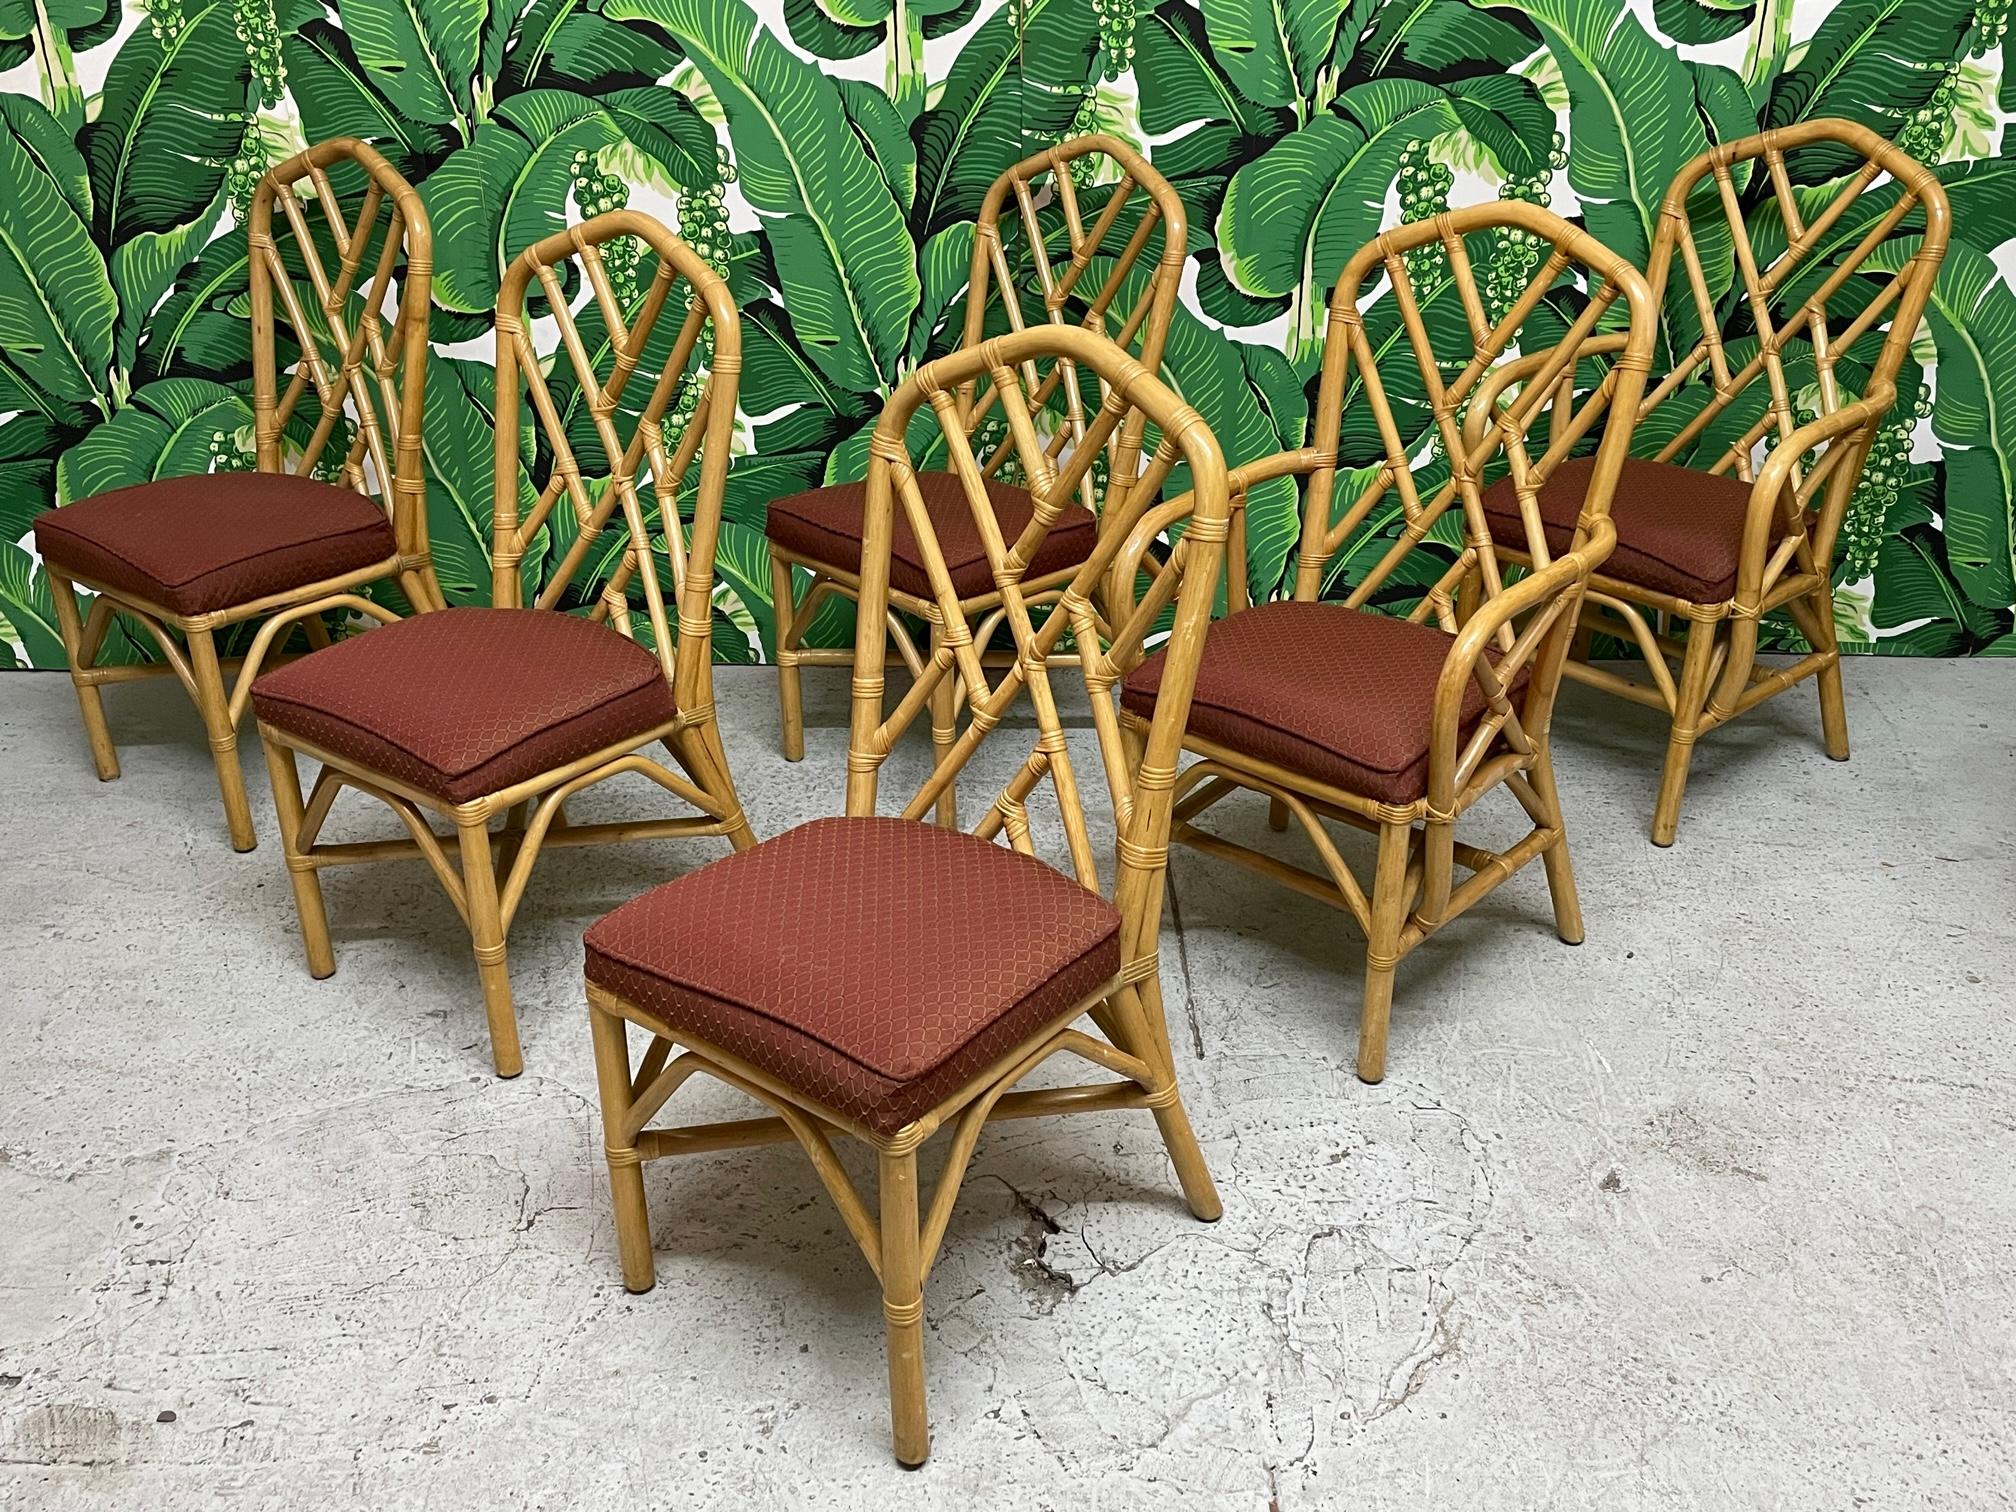 Set of six rattan dining chairs feature chinoiserie style fretwork,splayed rear legs, and cushioned seats. Good vintage condition with minor imperfections consistent with age (see photos). We also have a matching dining table, see our other